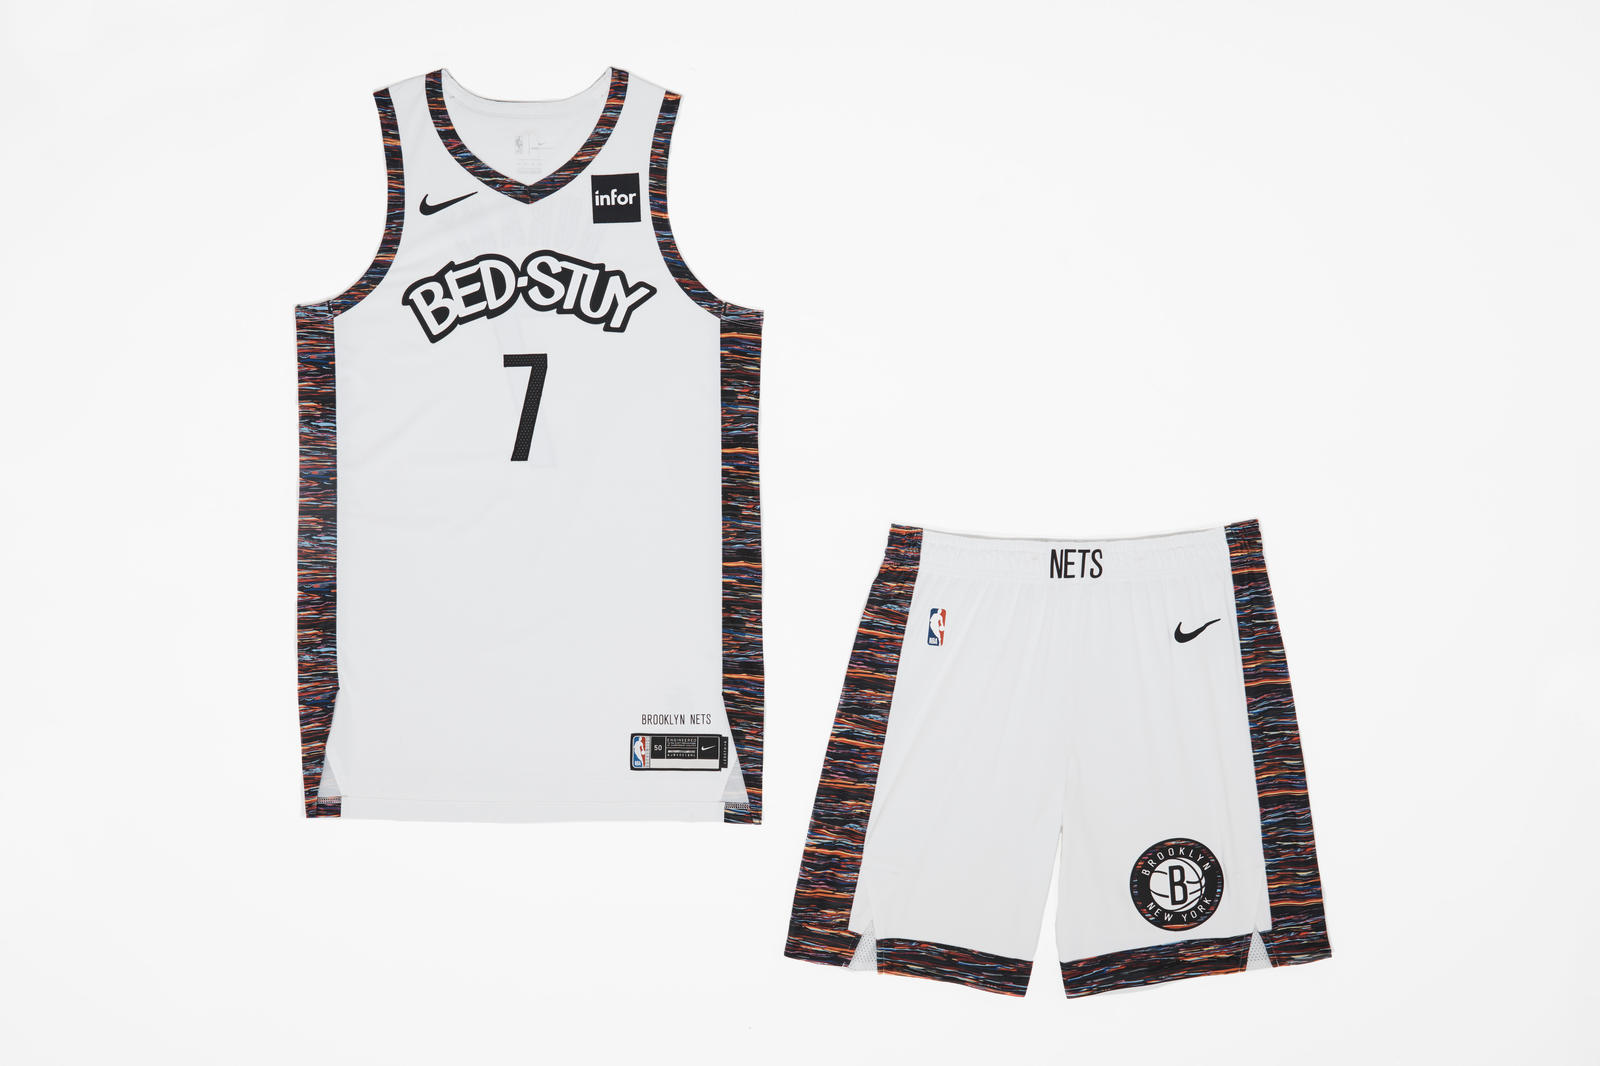 NBA City Edition Uniforms Officially Unveiled by Nike – SportsLogos.Net News